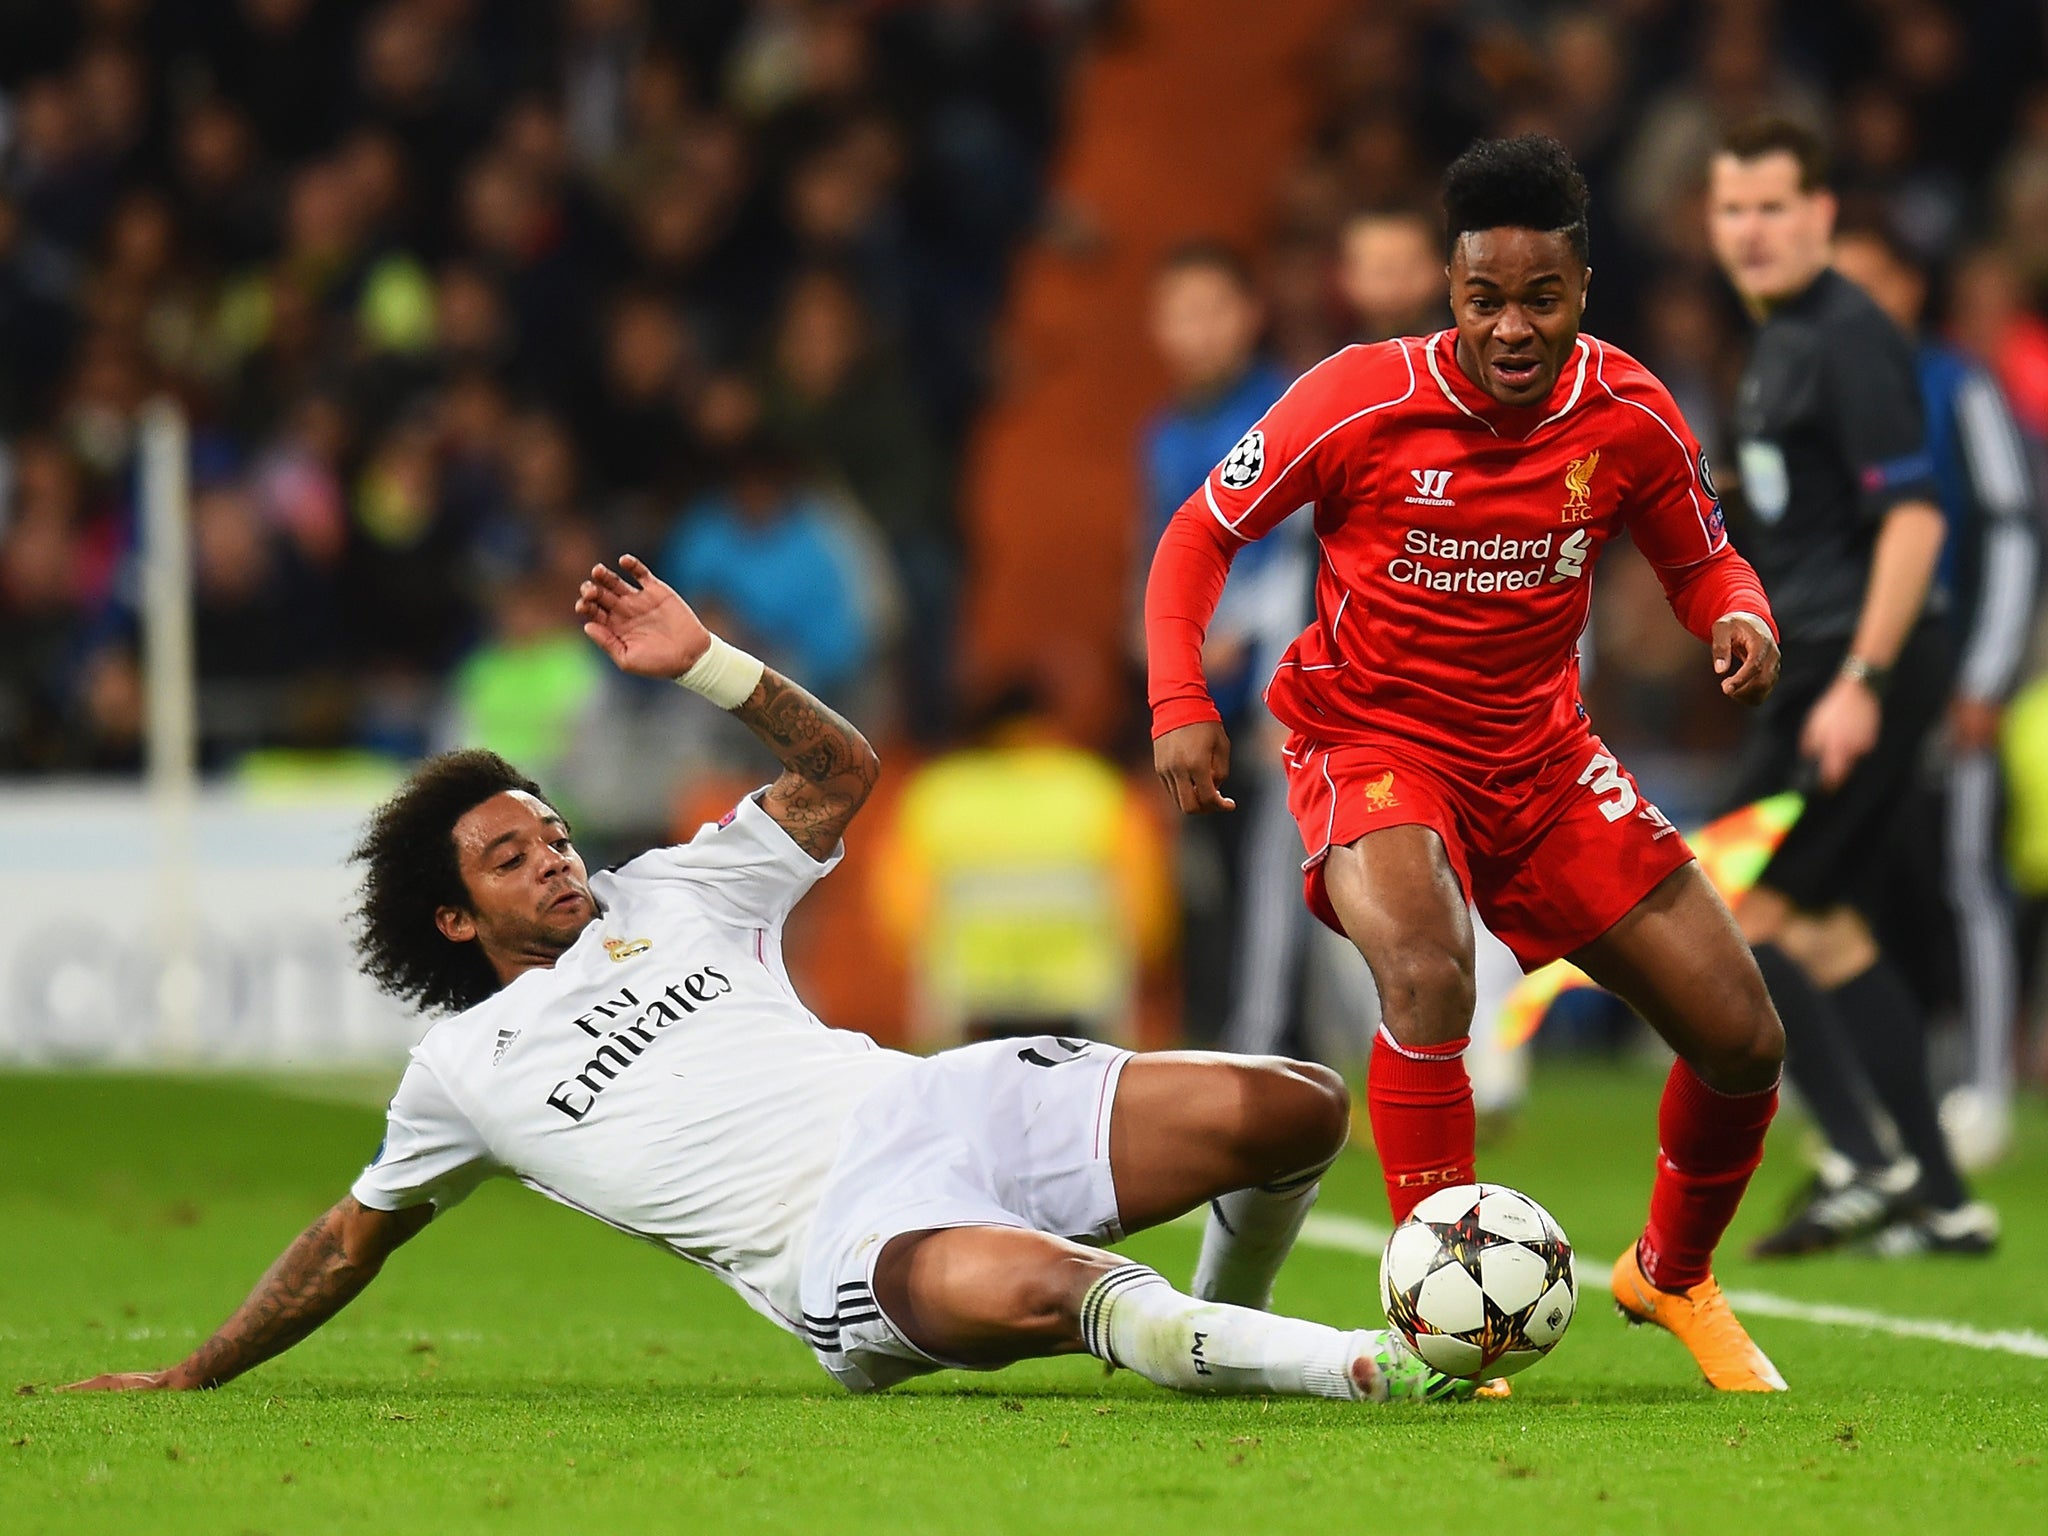 Raheem Sterling was one of the regular first-team players absent from the team that played Real